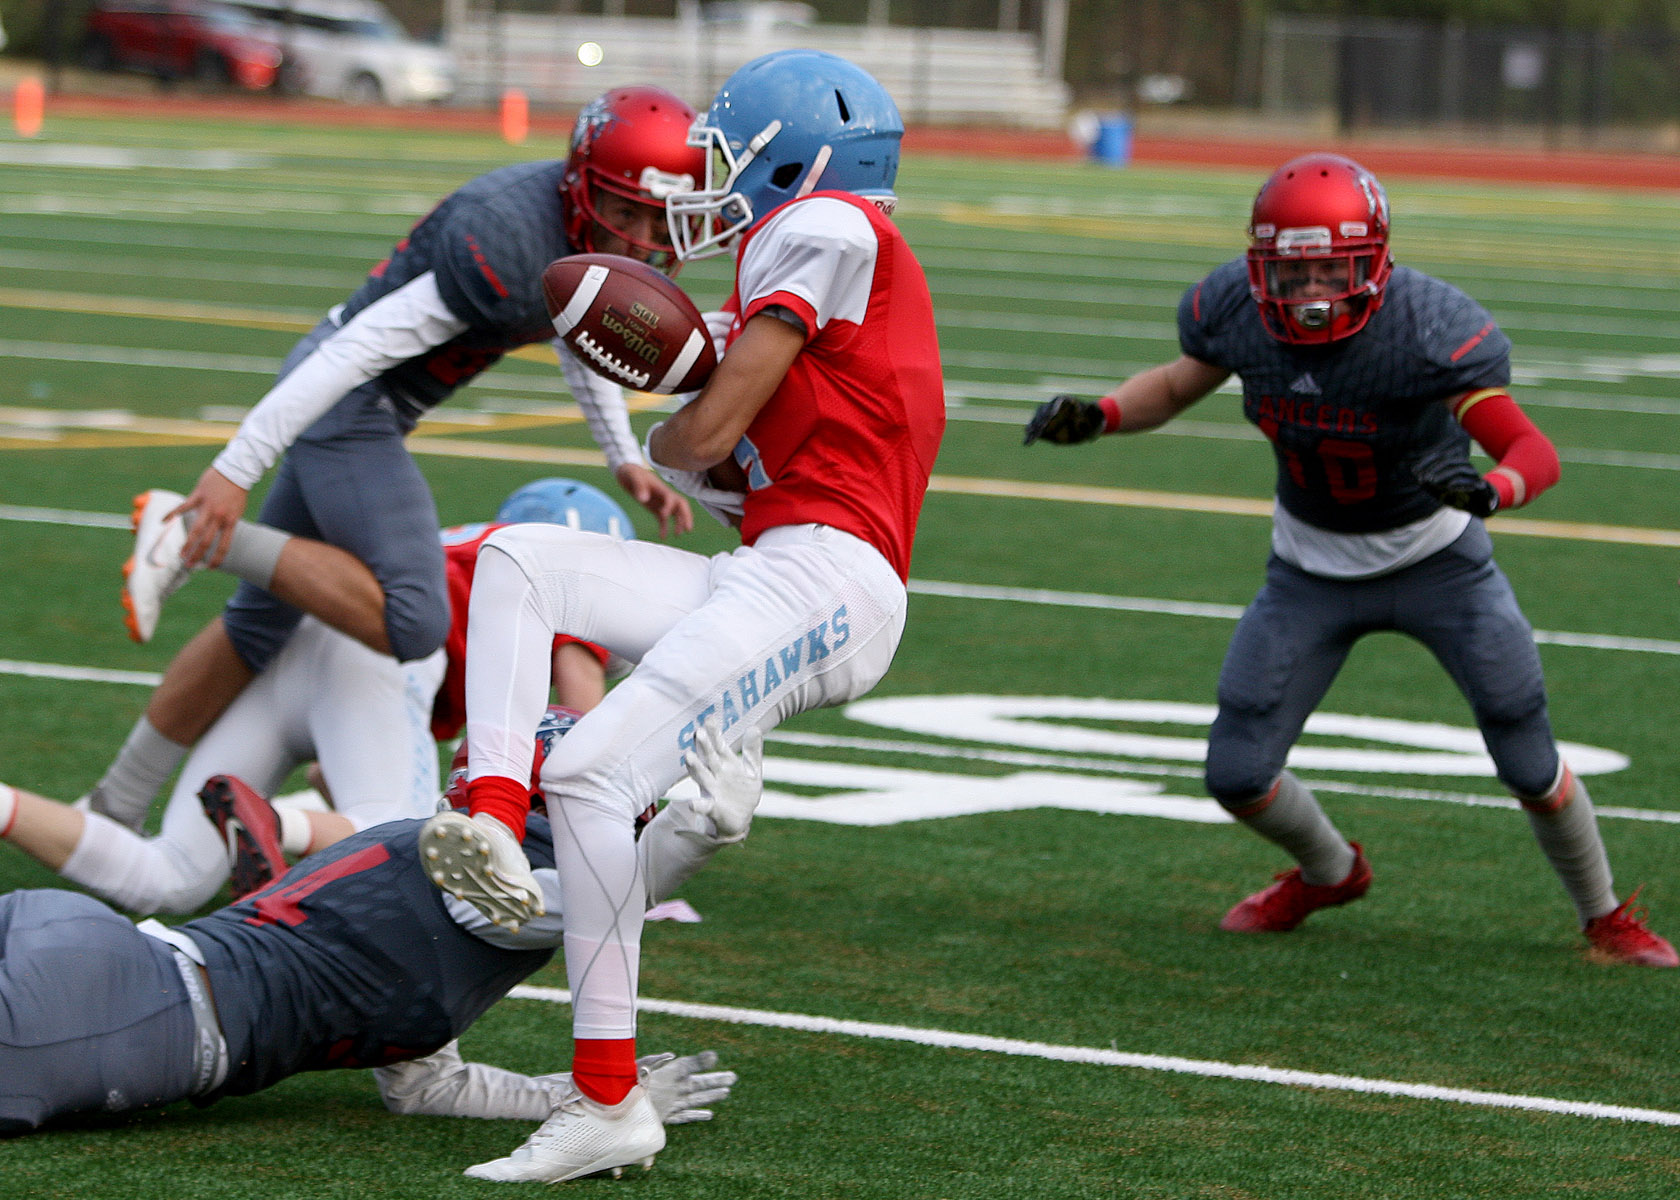 Quinn Killham of Chief Sealth fumbles the ball on the opening kickoff but Chief Sealth recovers the ball.